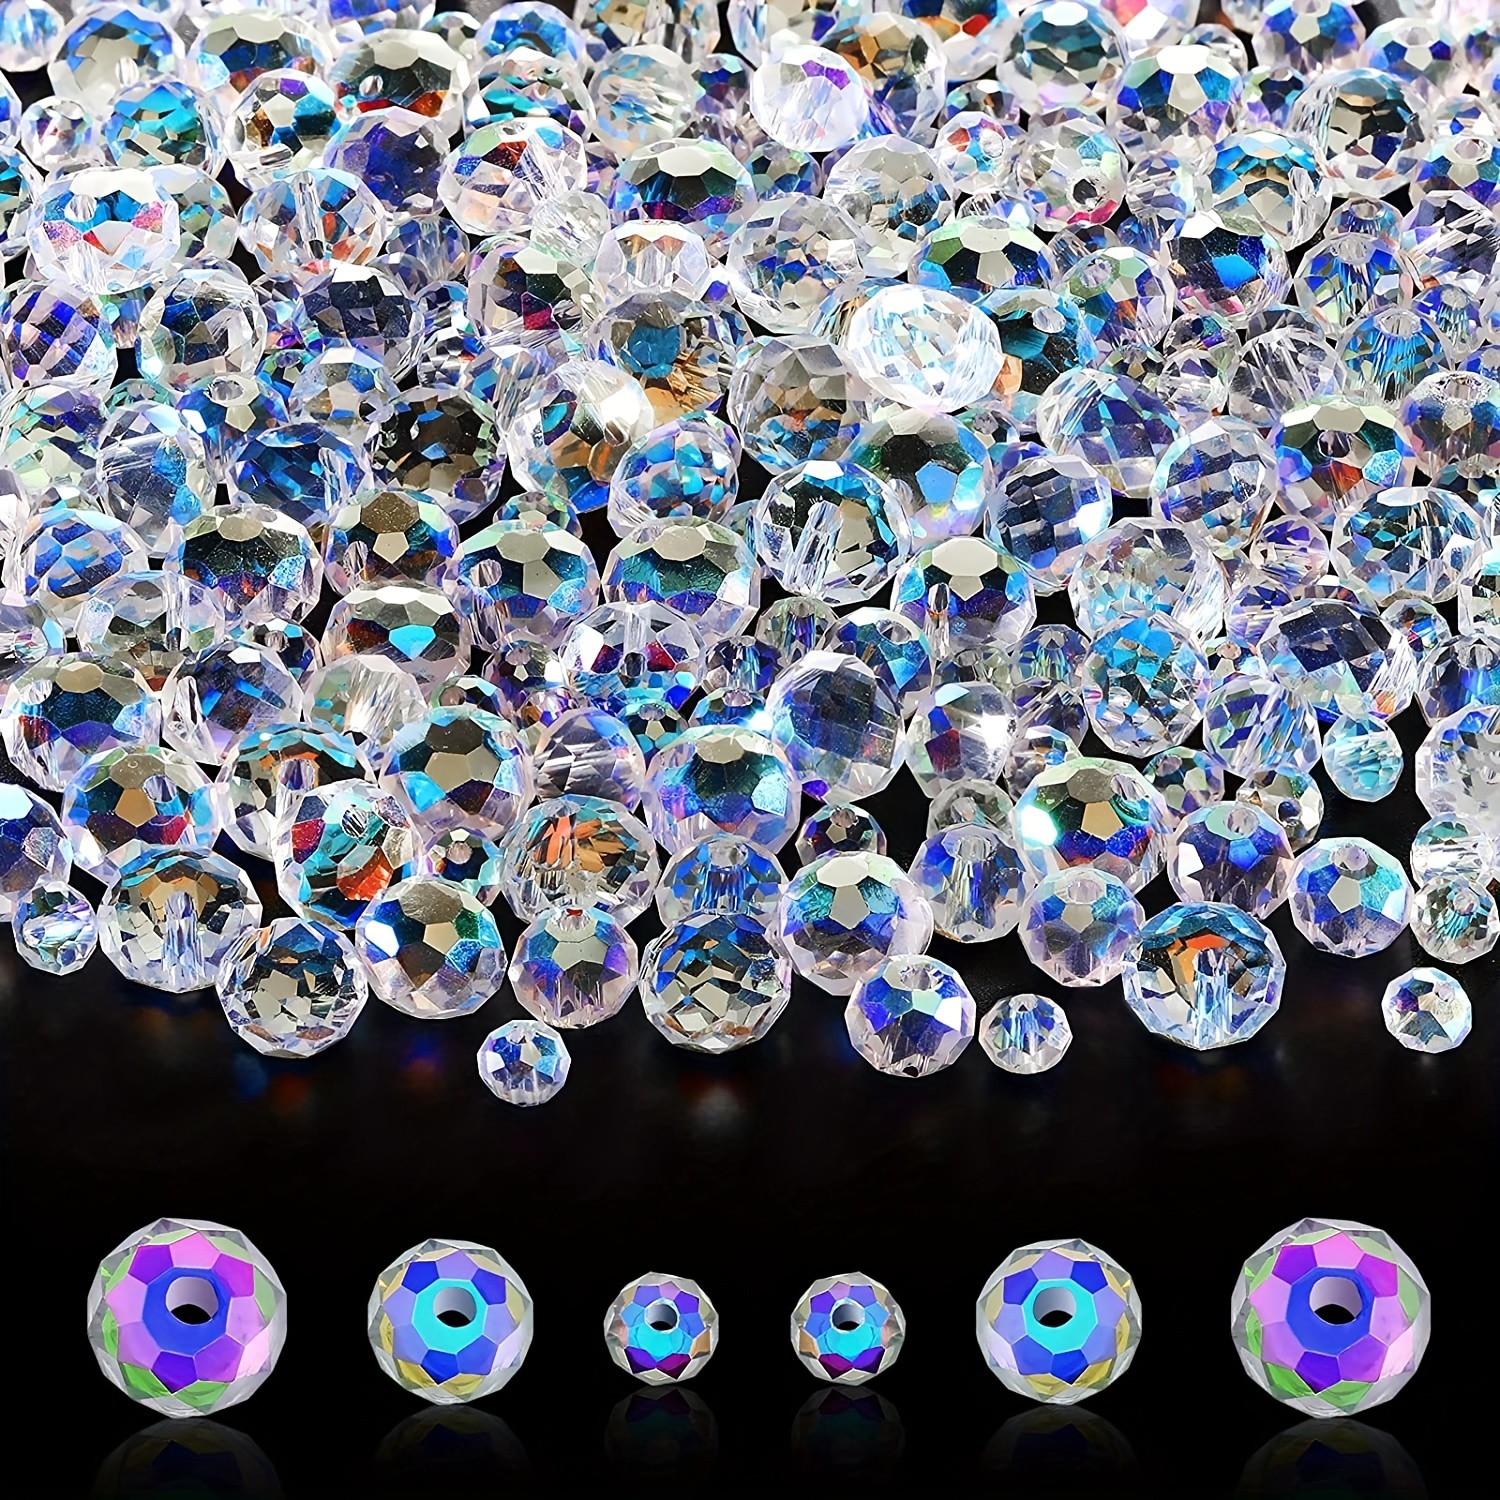  AB Beads, 5D Diamond Painting Accessories, 20 Colors Round  Drills AB Flatback Rhinestones for Gem Art, Diamonds for Craft,  2.8MM/20000PCS : Arts, Crafts & Sewing